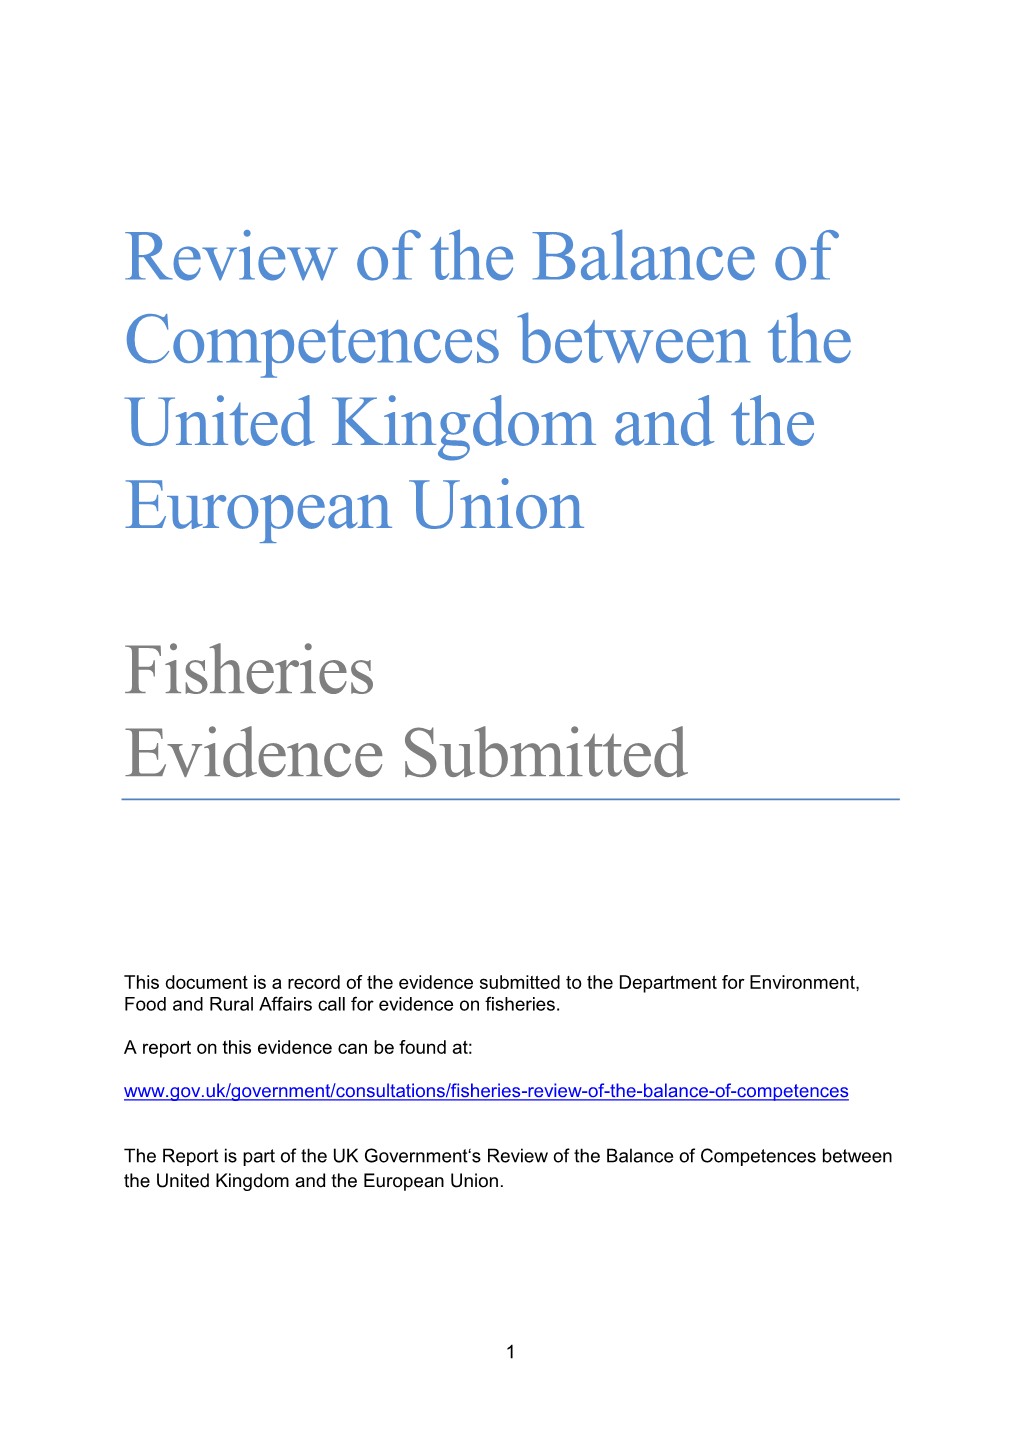 Review of the Balance of Competences Between the United Kingdom and the European Union